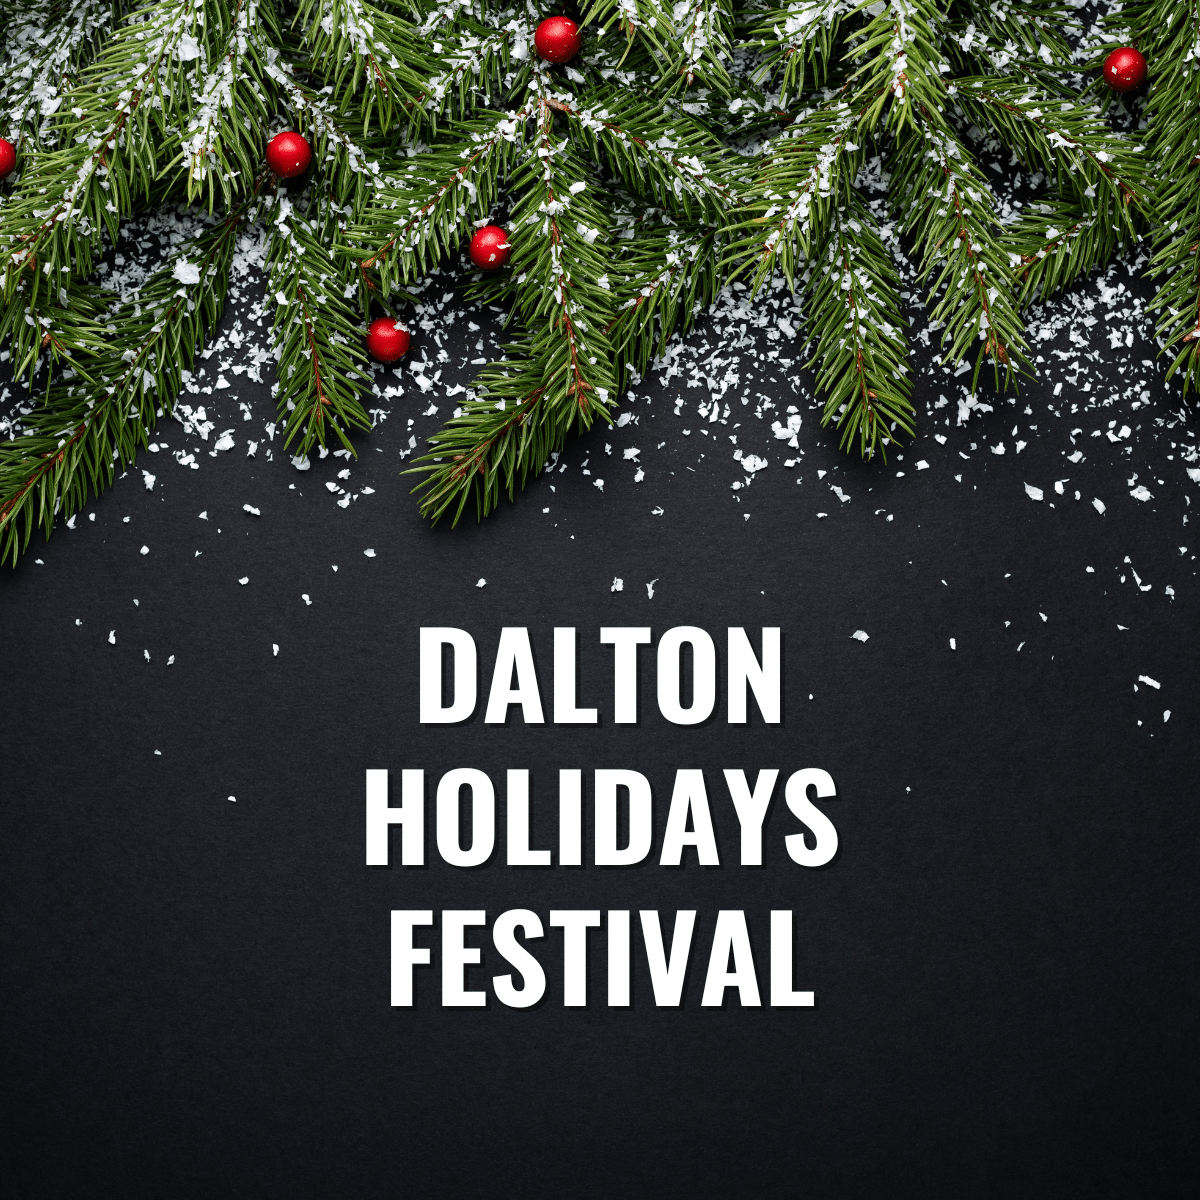 square image with a photo of Christmas tree branches on a chalkboard background. The text Dalton Holidays Festival is on the chalkboard